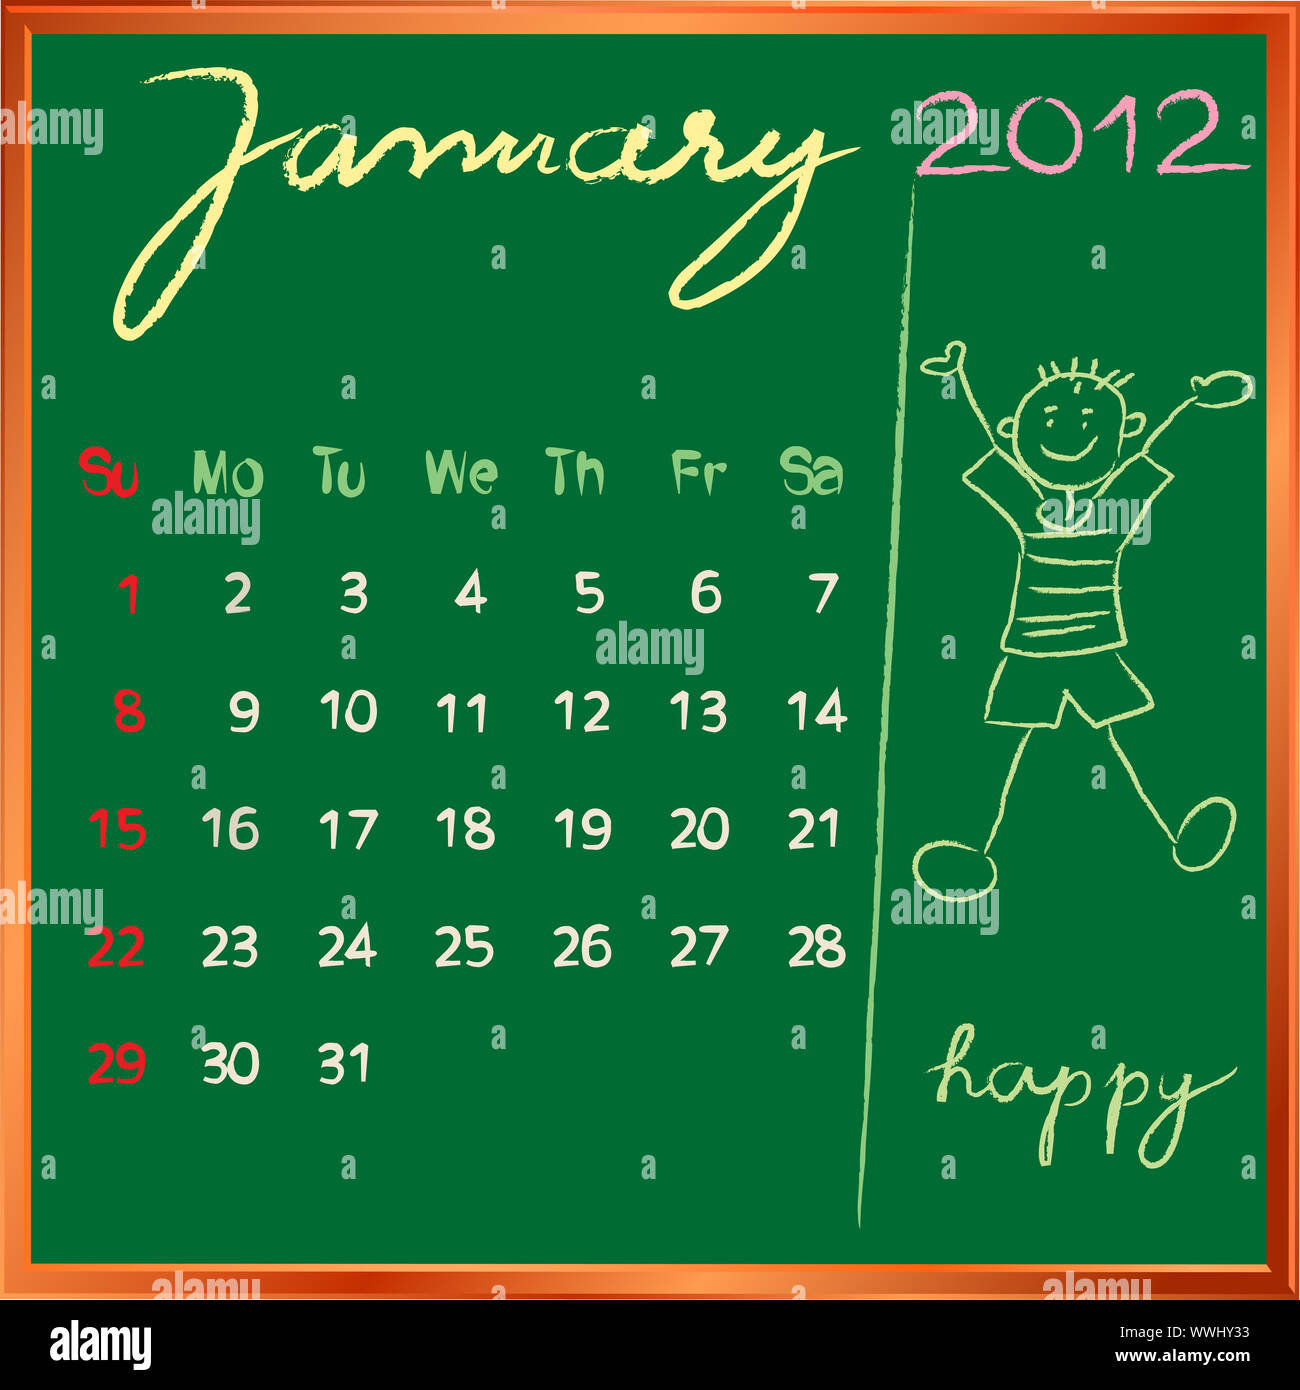 12 Calendar On A Blackboard January Design With The Happy Student Profile For International Schools Stock Photo Alamy